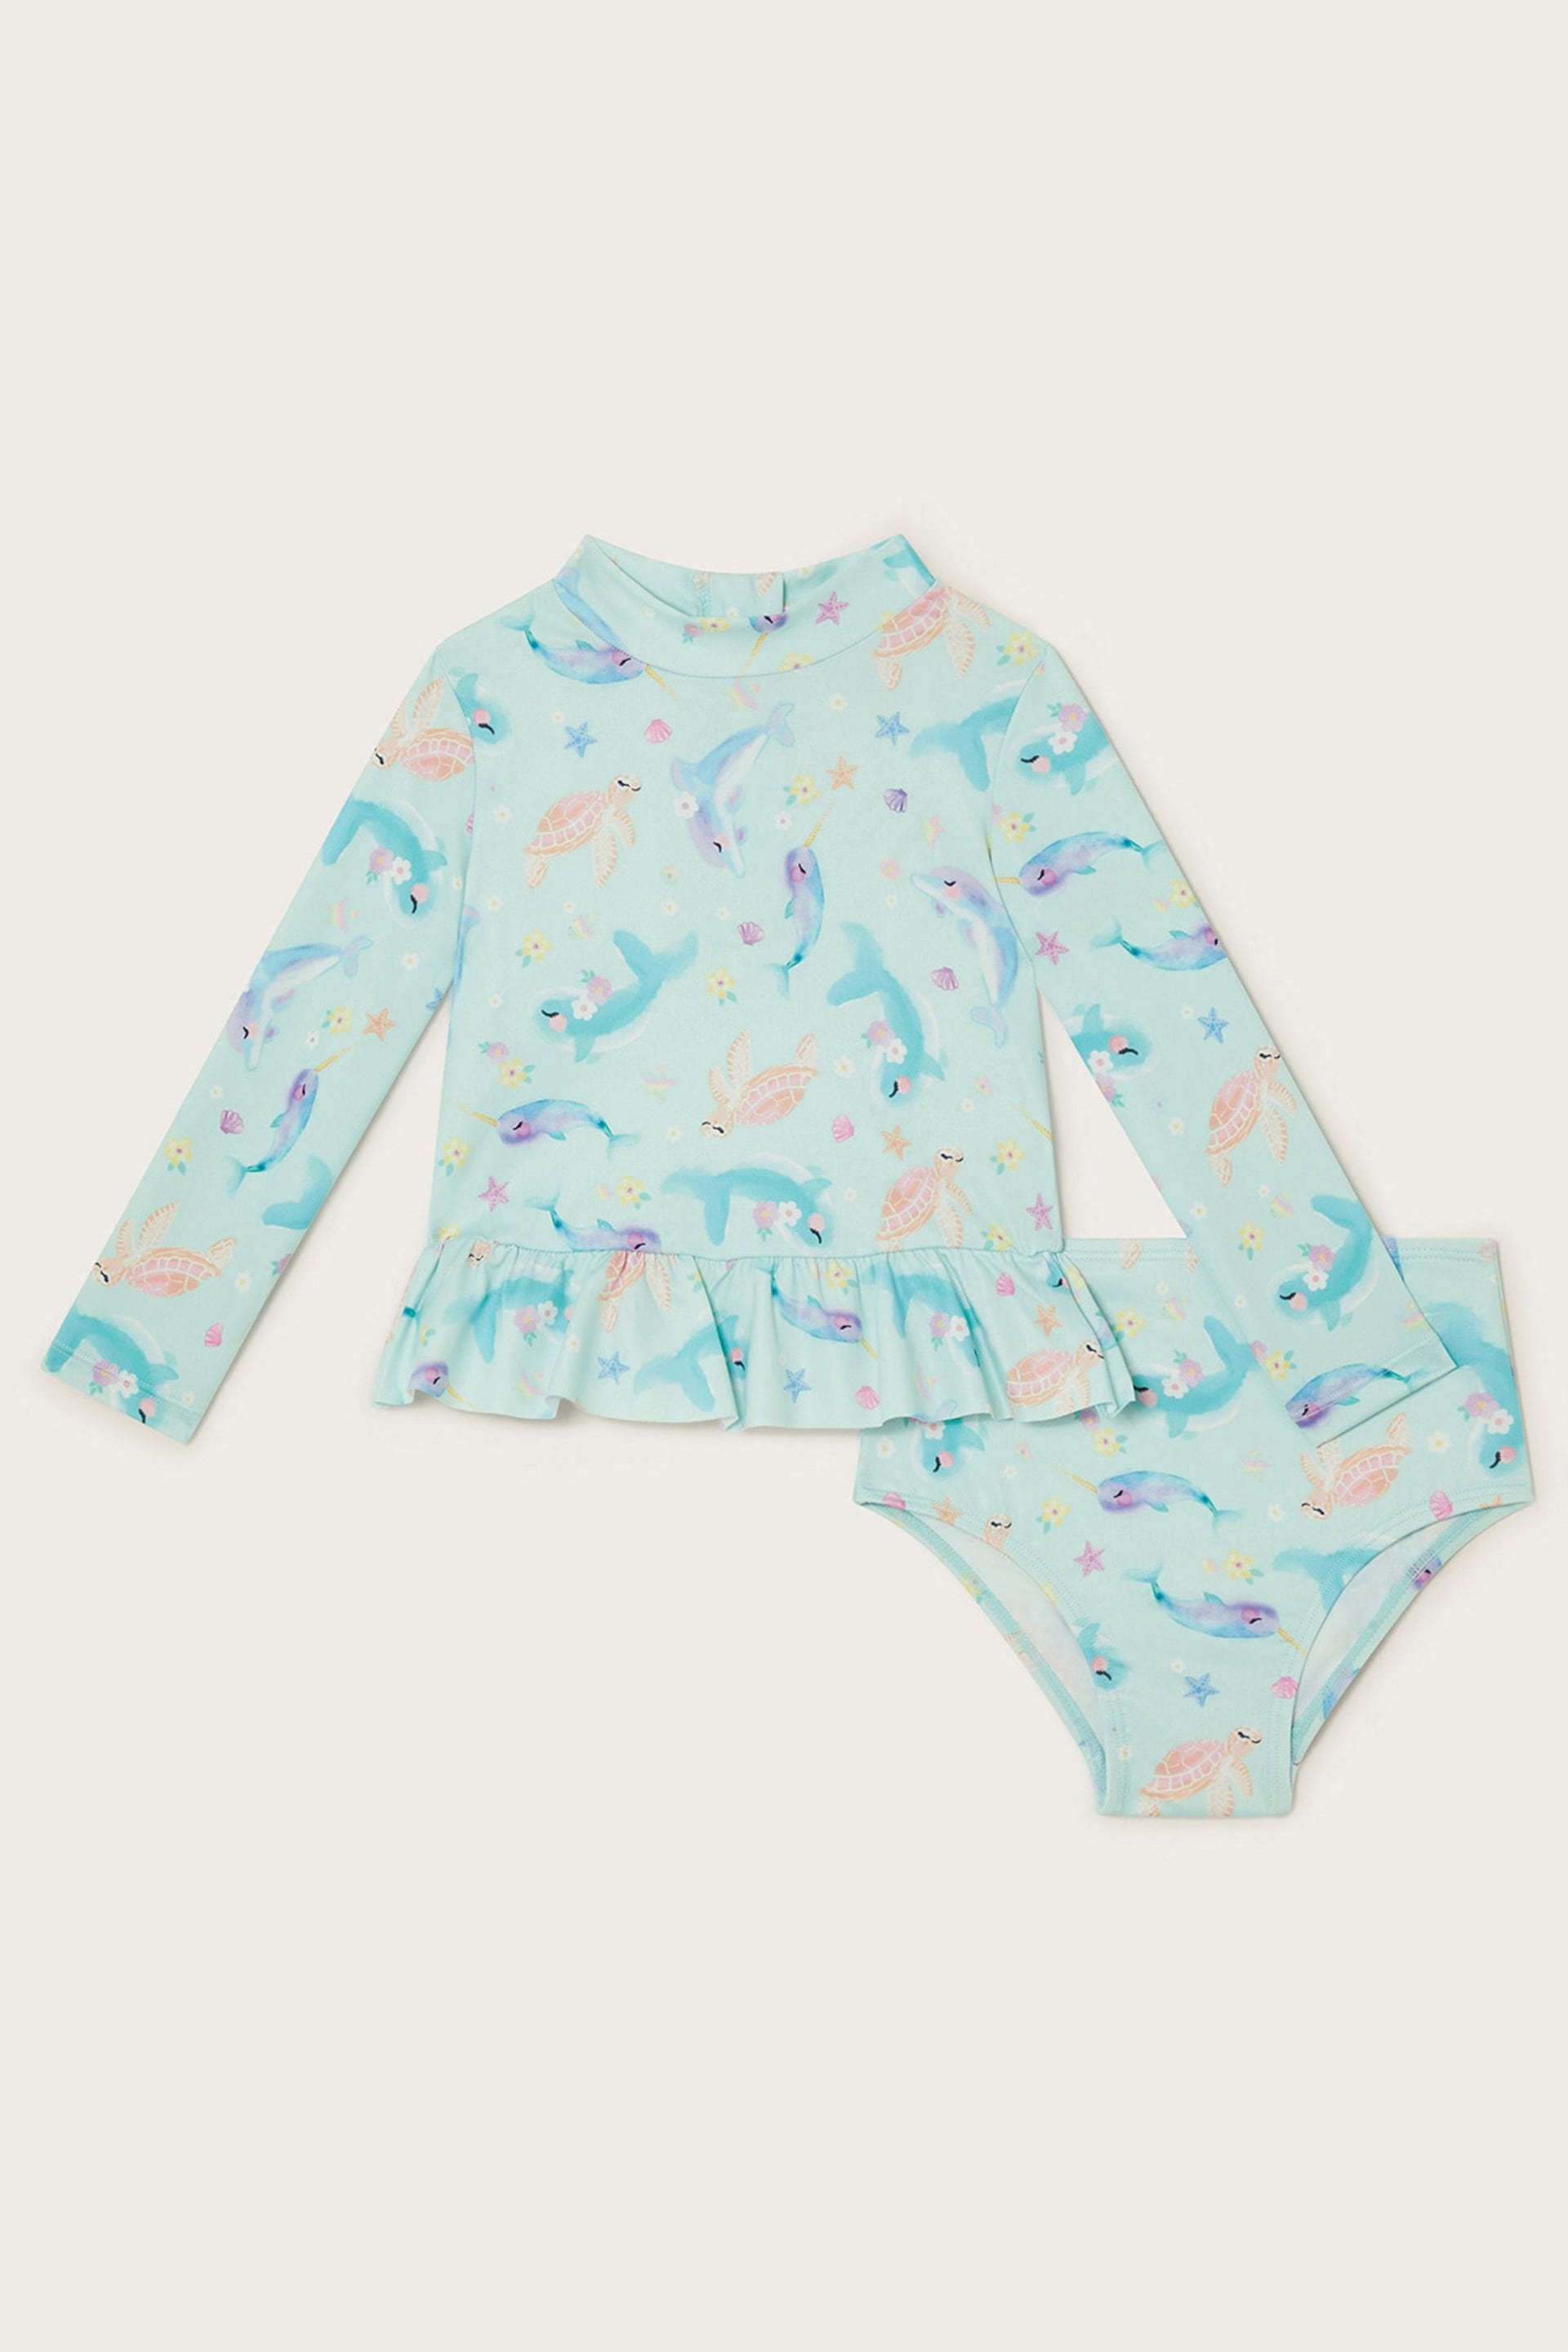 Monsoon Blue Sea Creatures Two-Piece Sunsafe Suit - Image 1 of 3